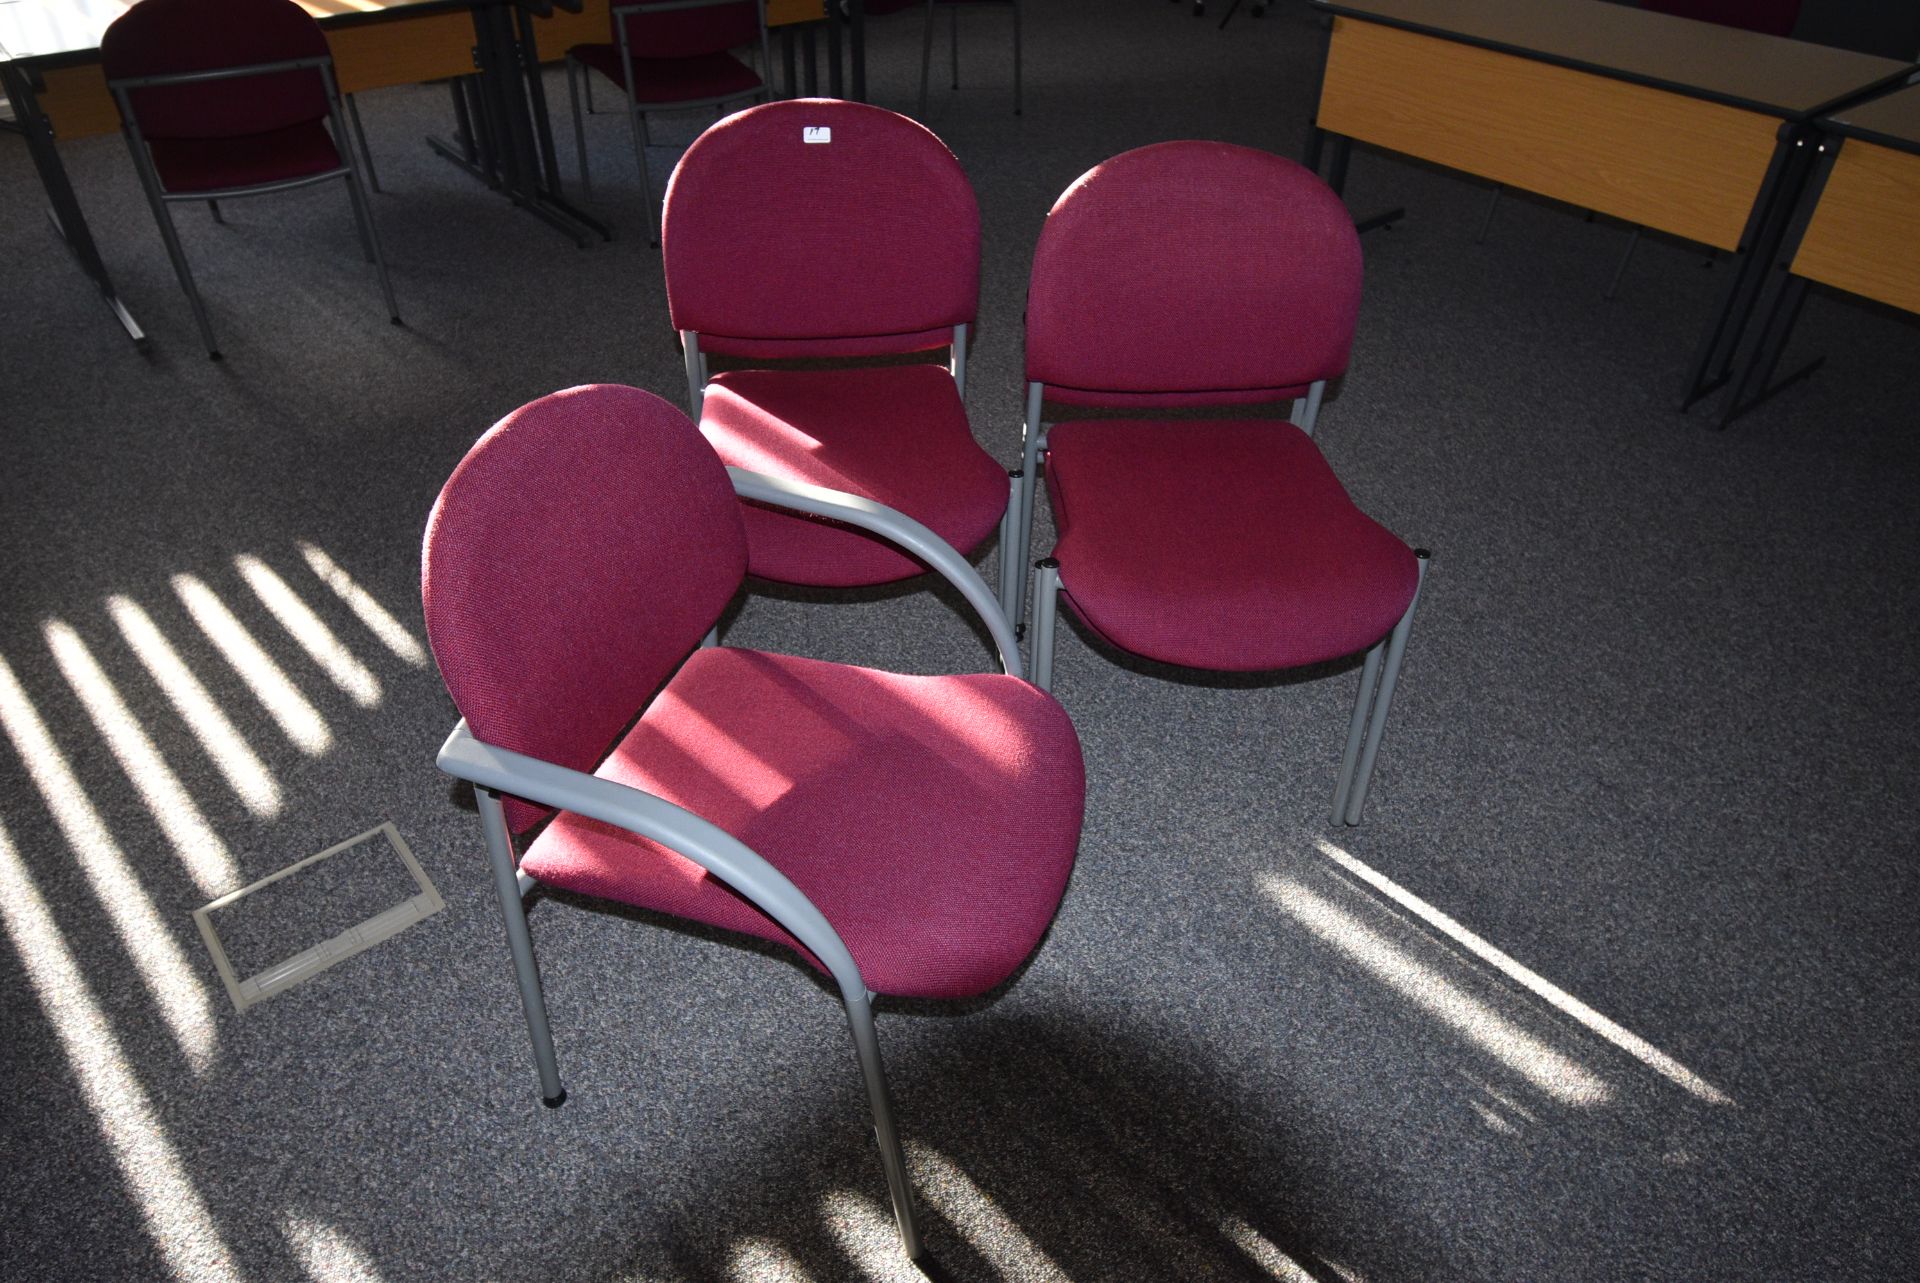 *Thirty-One Stackable Tubular Framed Meeting Room Chairs with Upholstered Seats & Backs